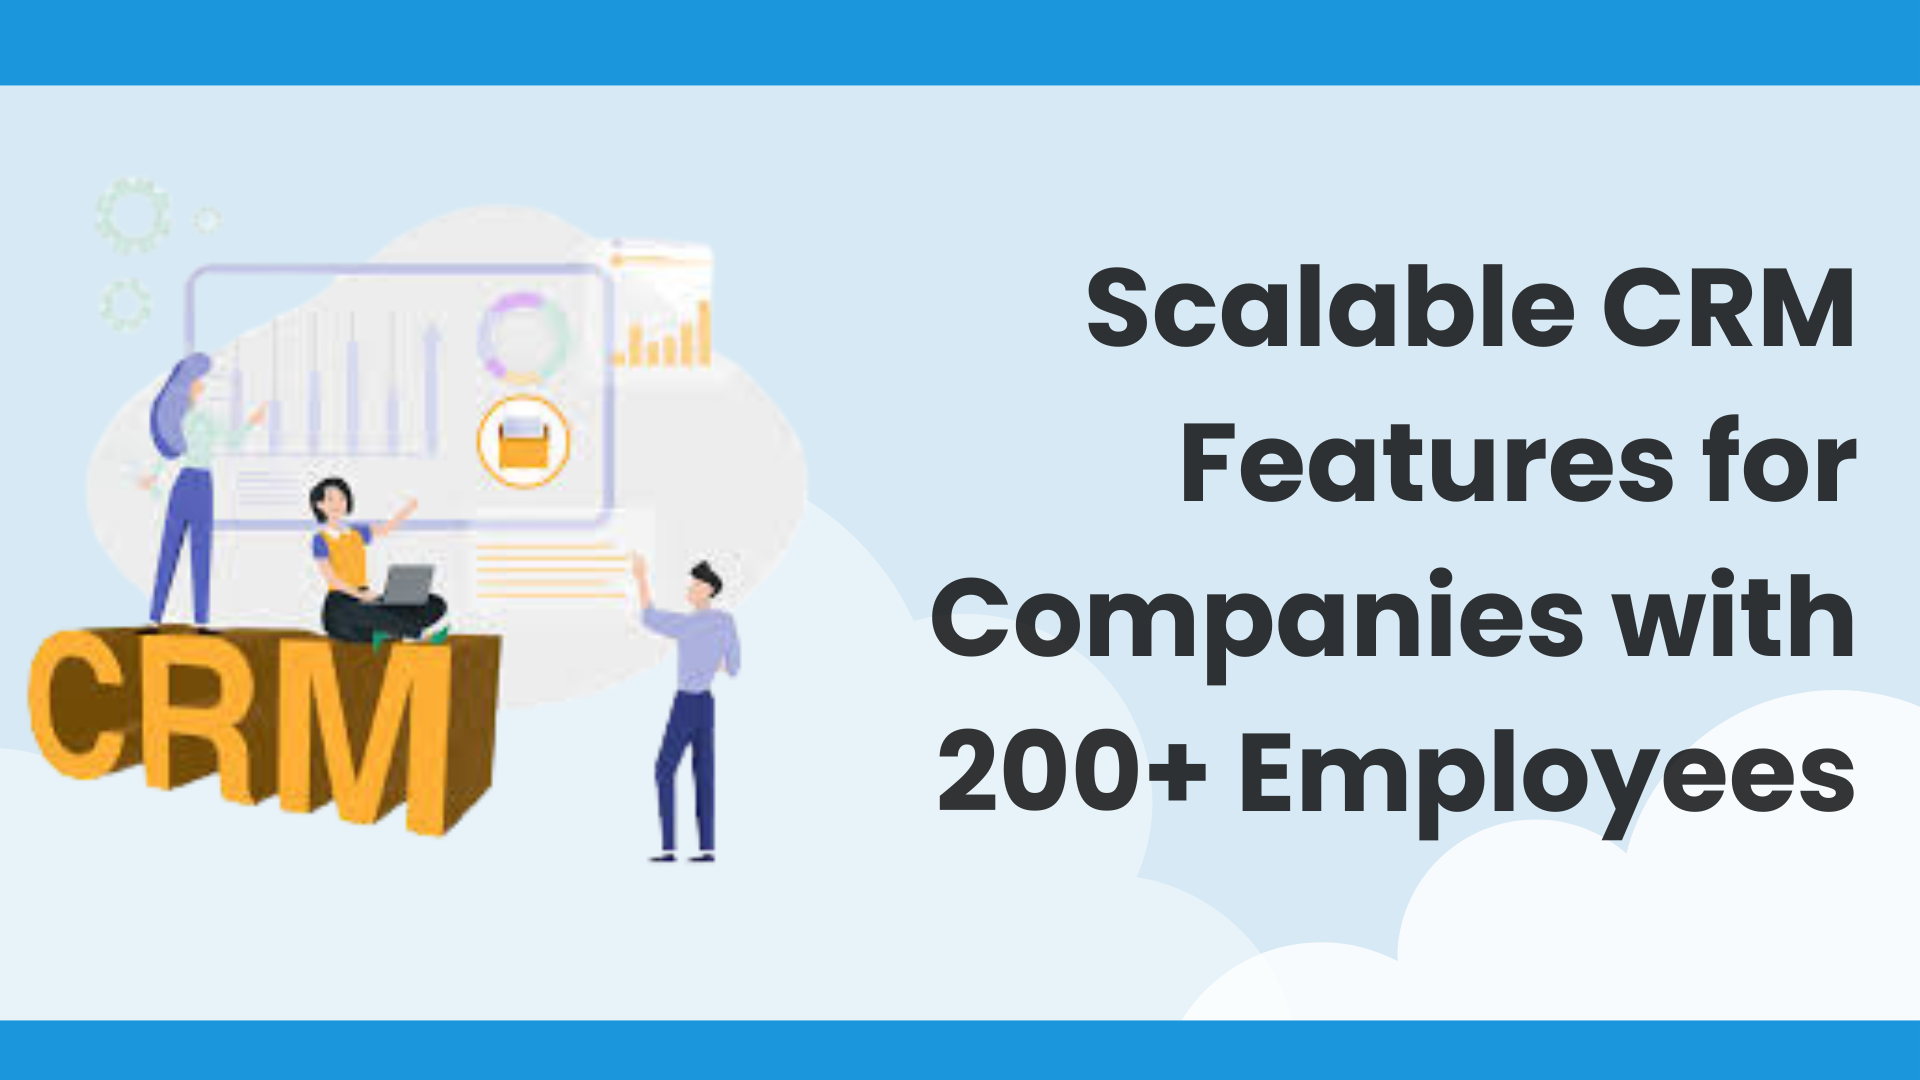 Scalable CRM Features for Companies with 200+ Employees